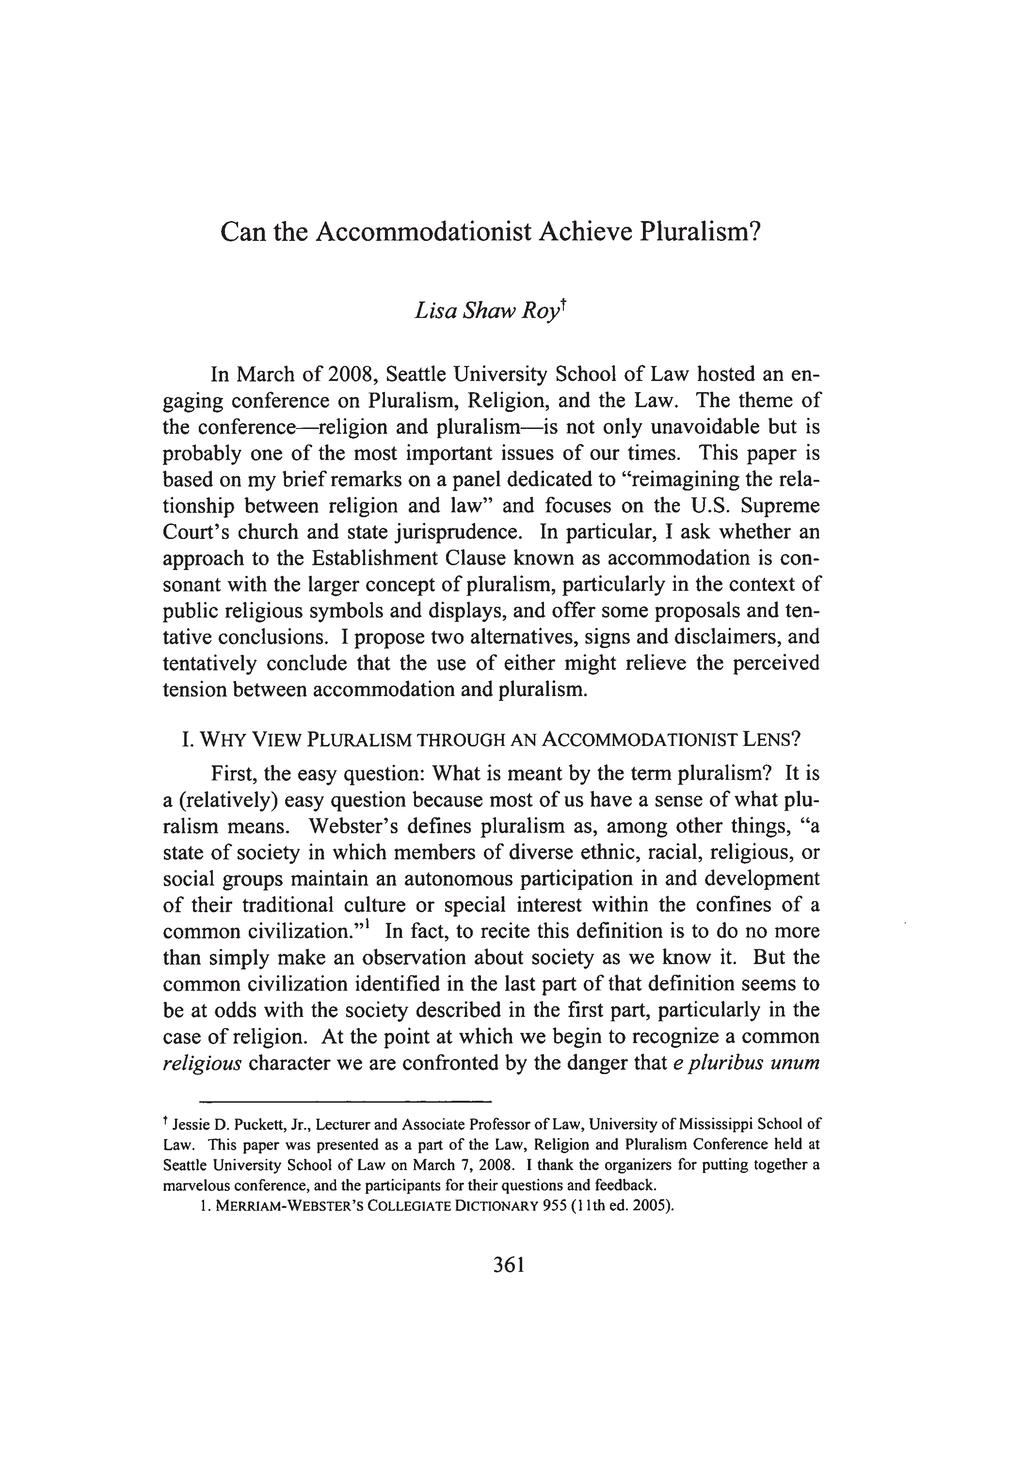 Can the Accommodationist Achieve Pluralism? Lisa Shaw Royt In March of 2008, Seattle University School of Law hosted an engaging conference on Pluralism, Religion, and the Law.